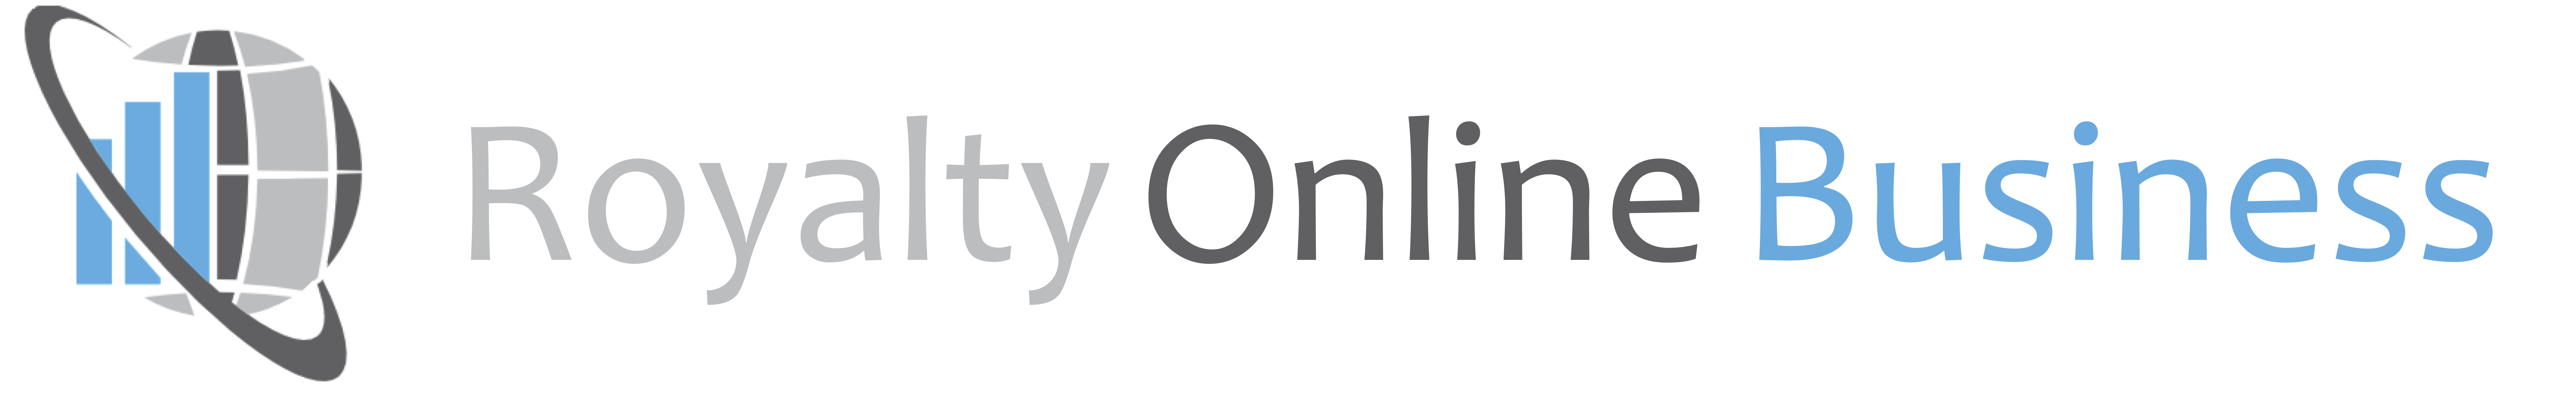 Royalty Online Business